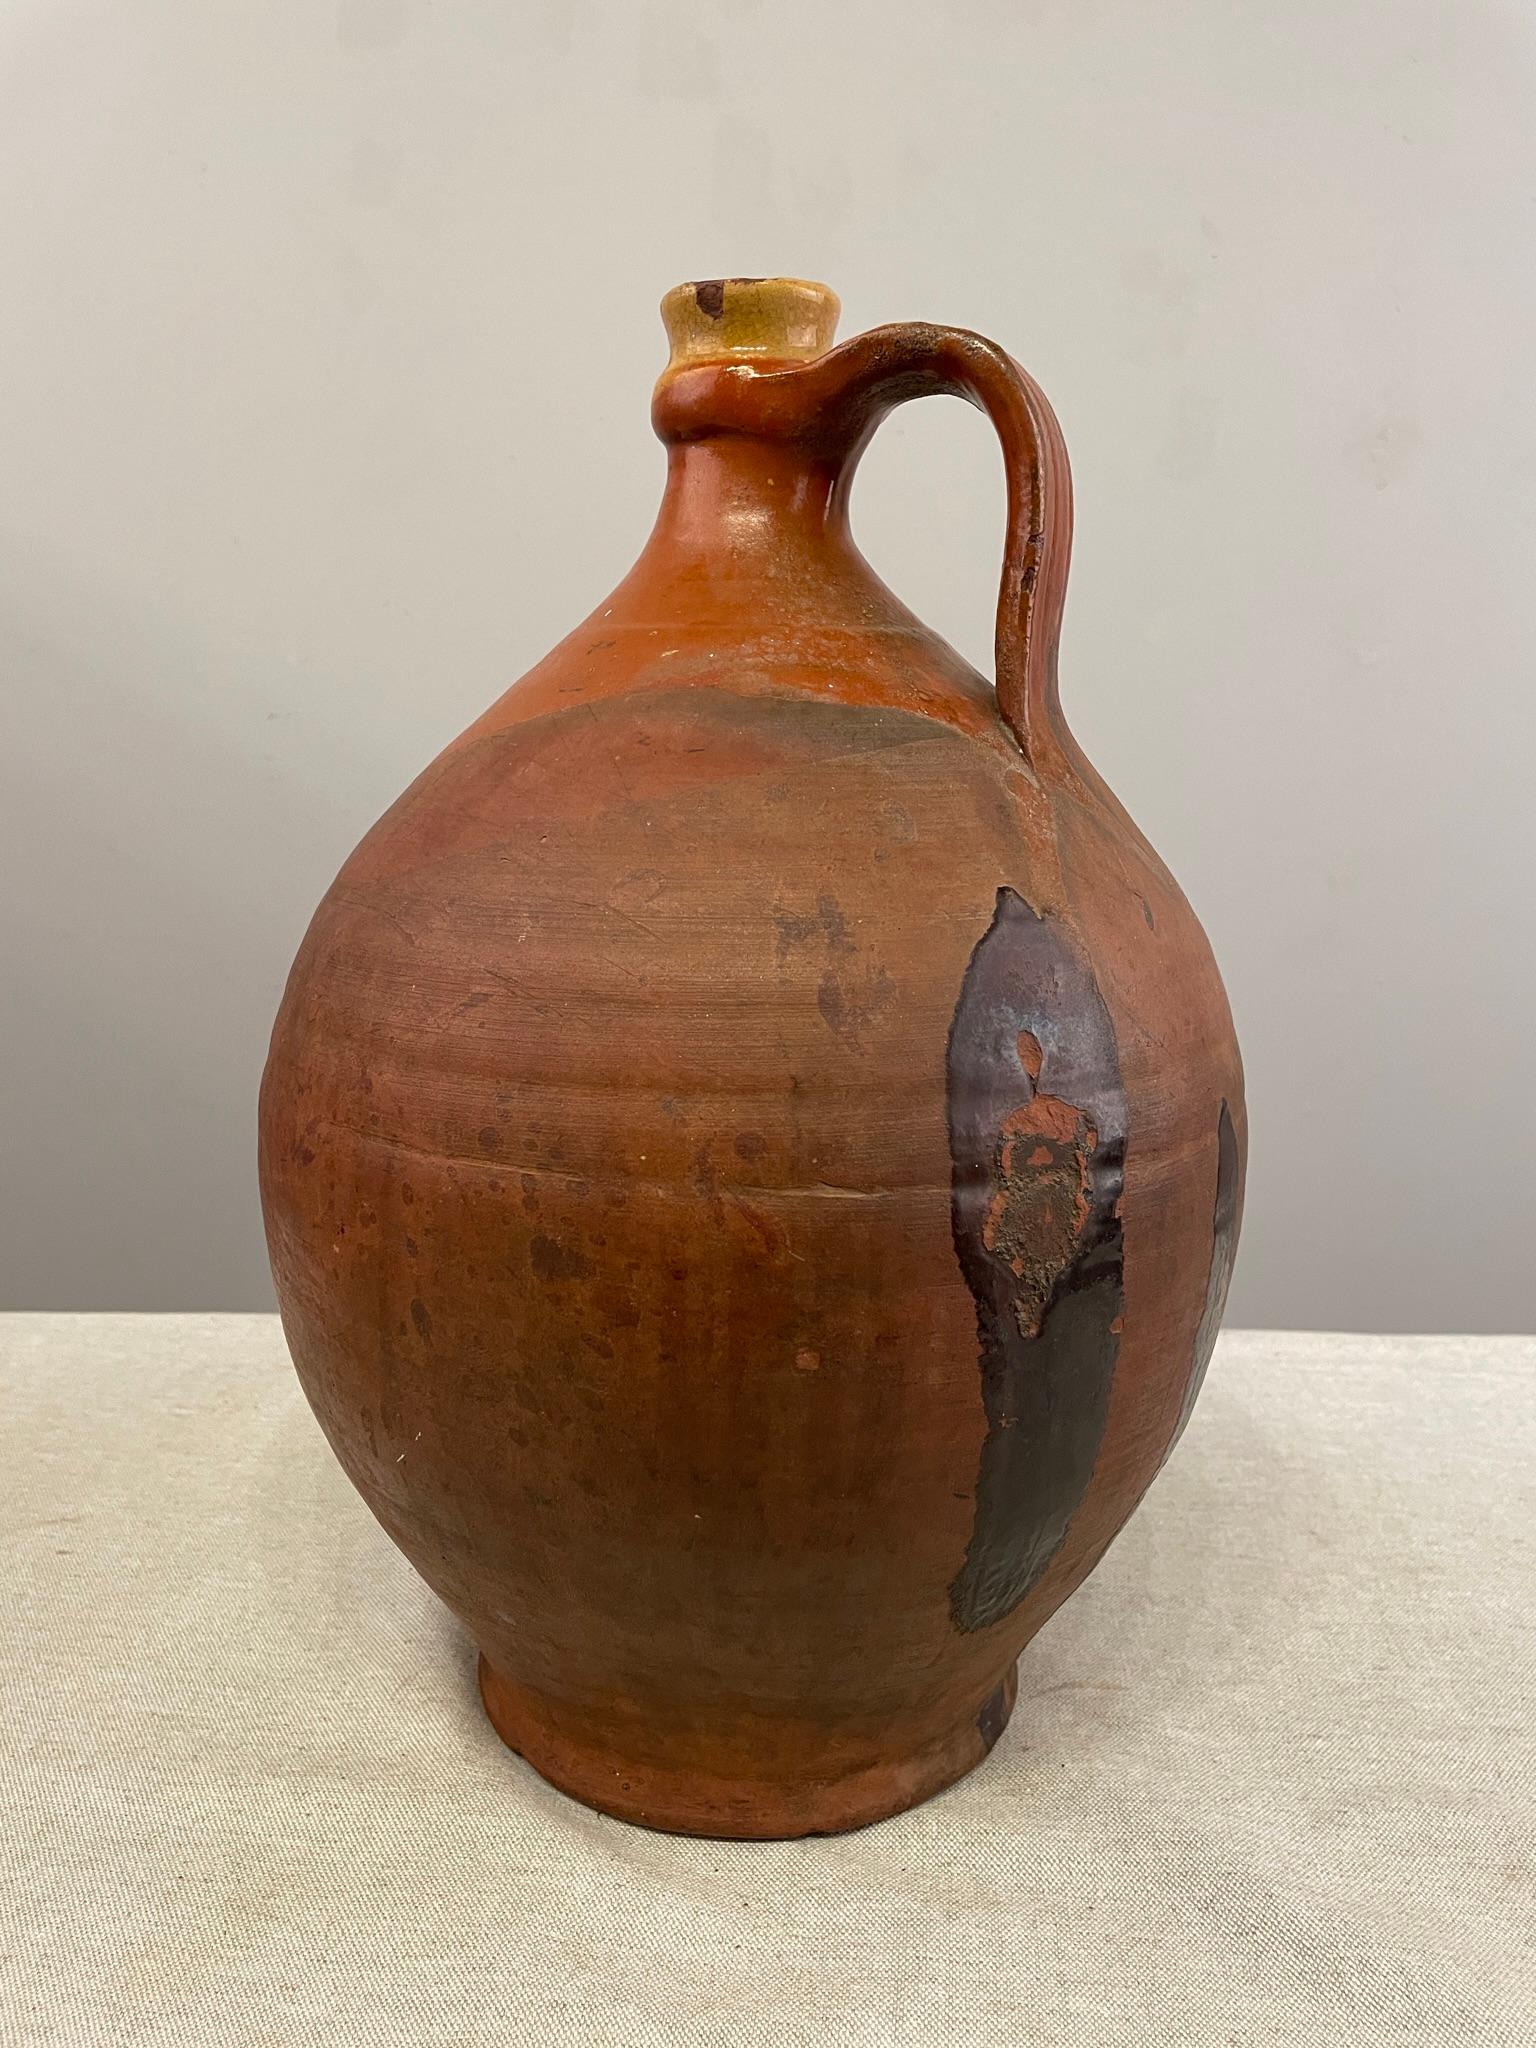 A French Terracotta Pottery water jug with some glazing near the top. Great color and it weighs 9 Lbs. Dimensions are 15